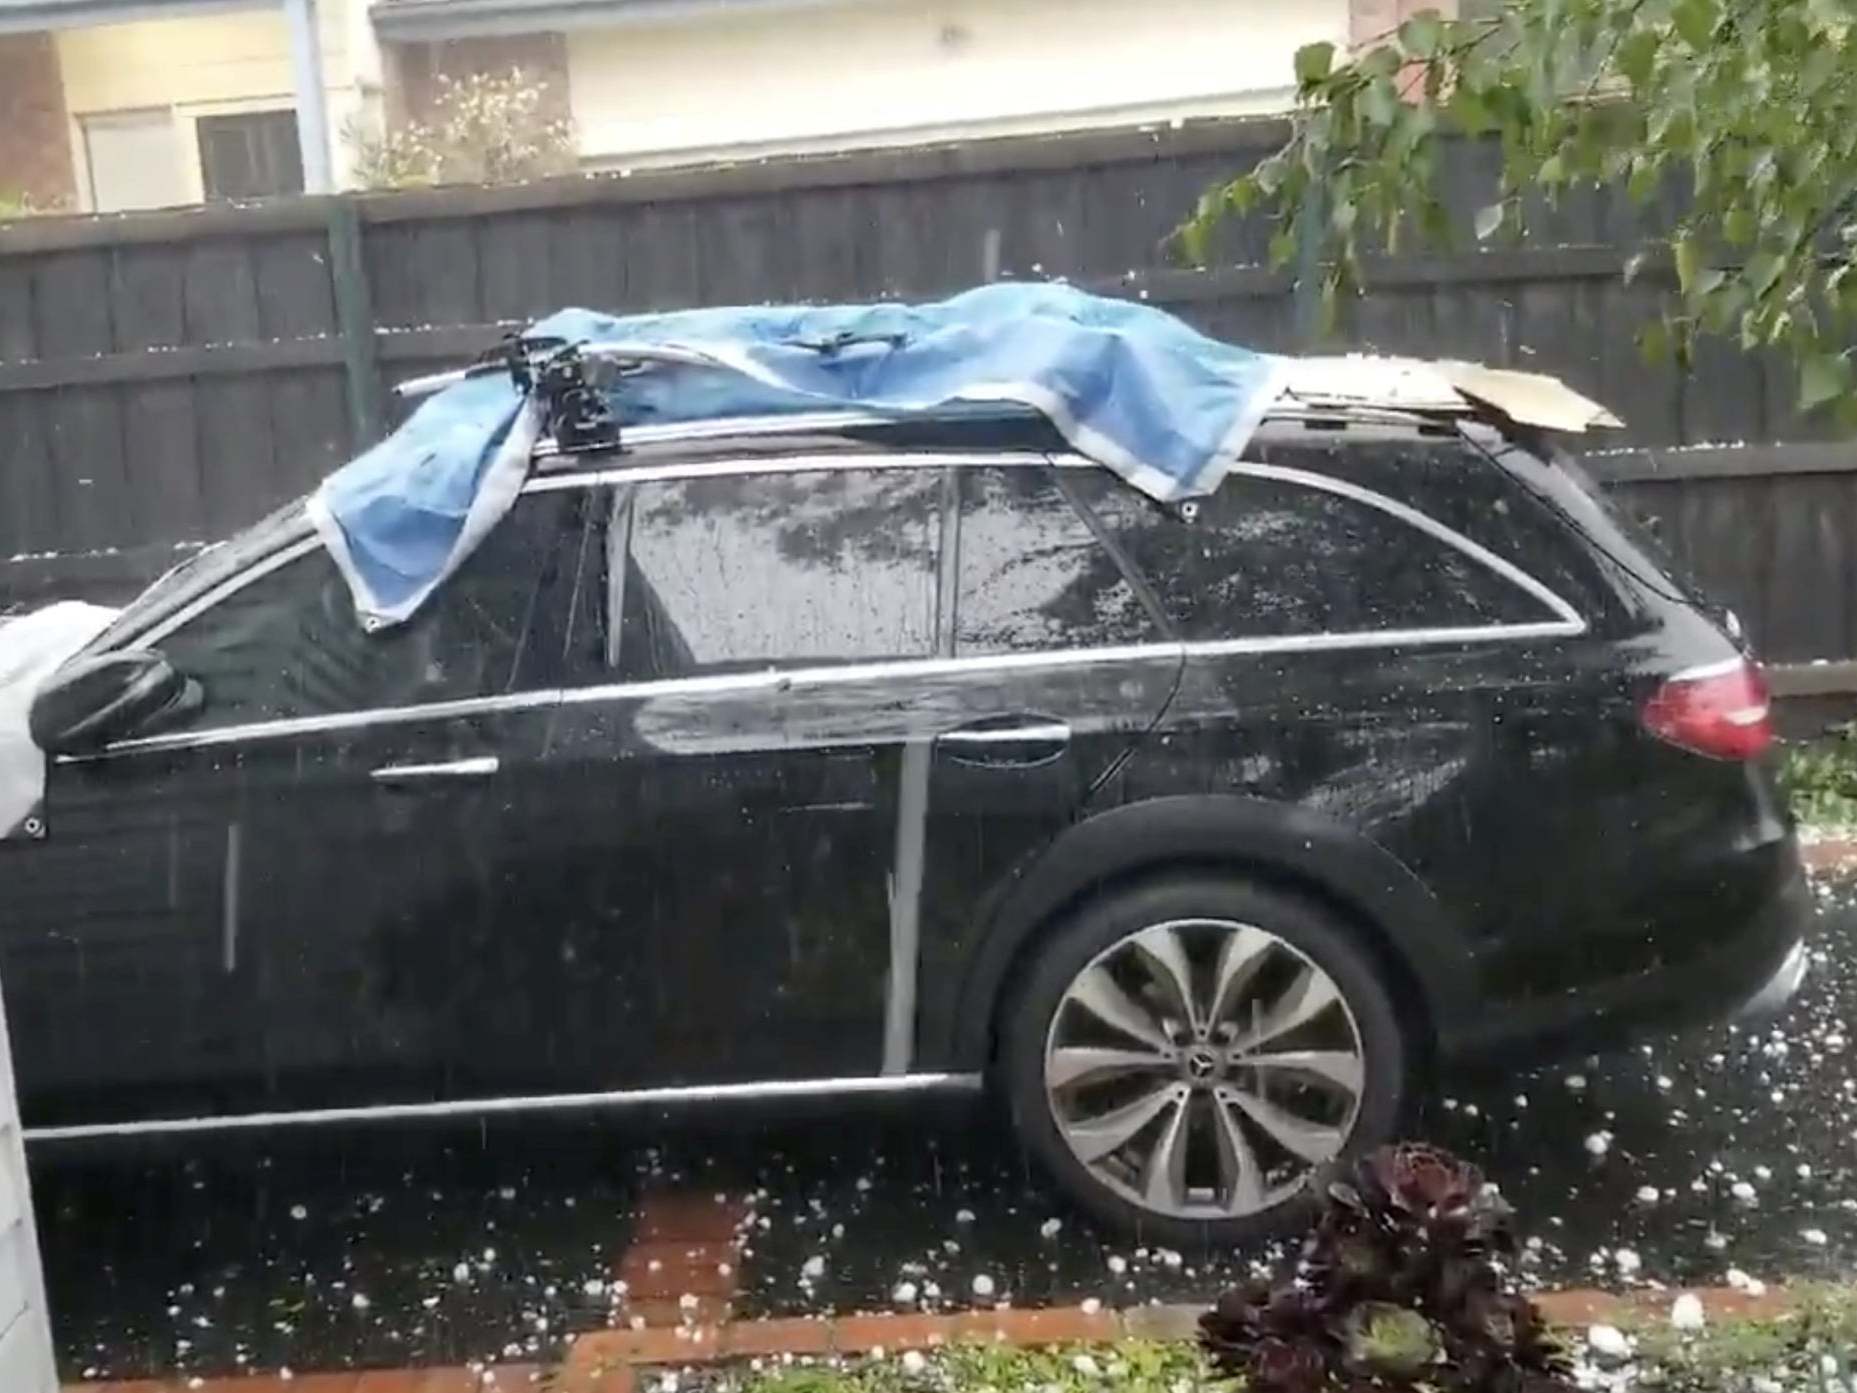 Hailstones up to 5cm in diameter have been reported in Victoria state after torrential rain battered Australia